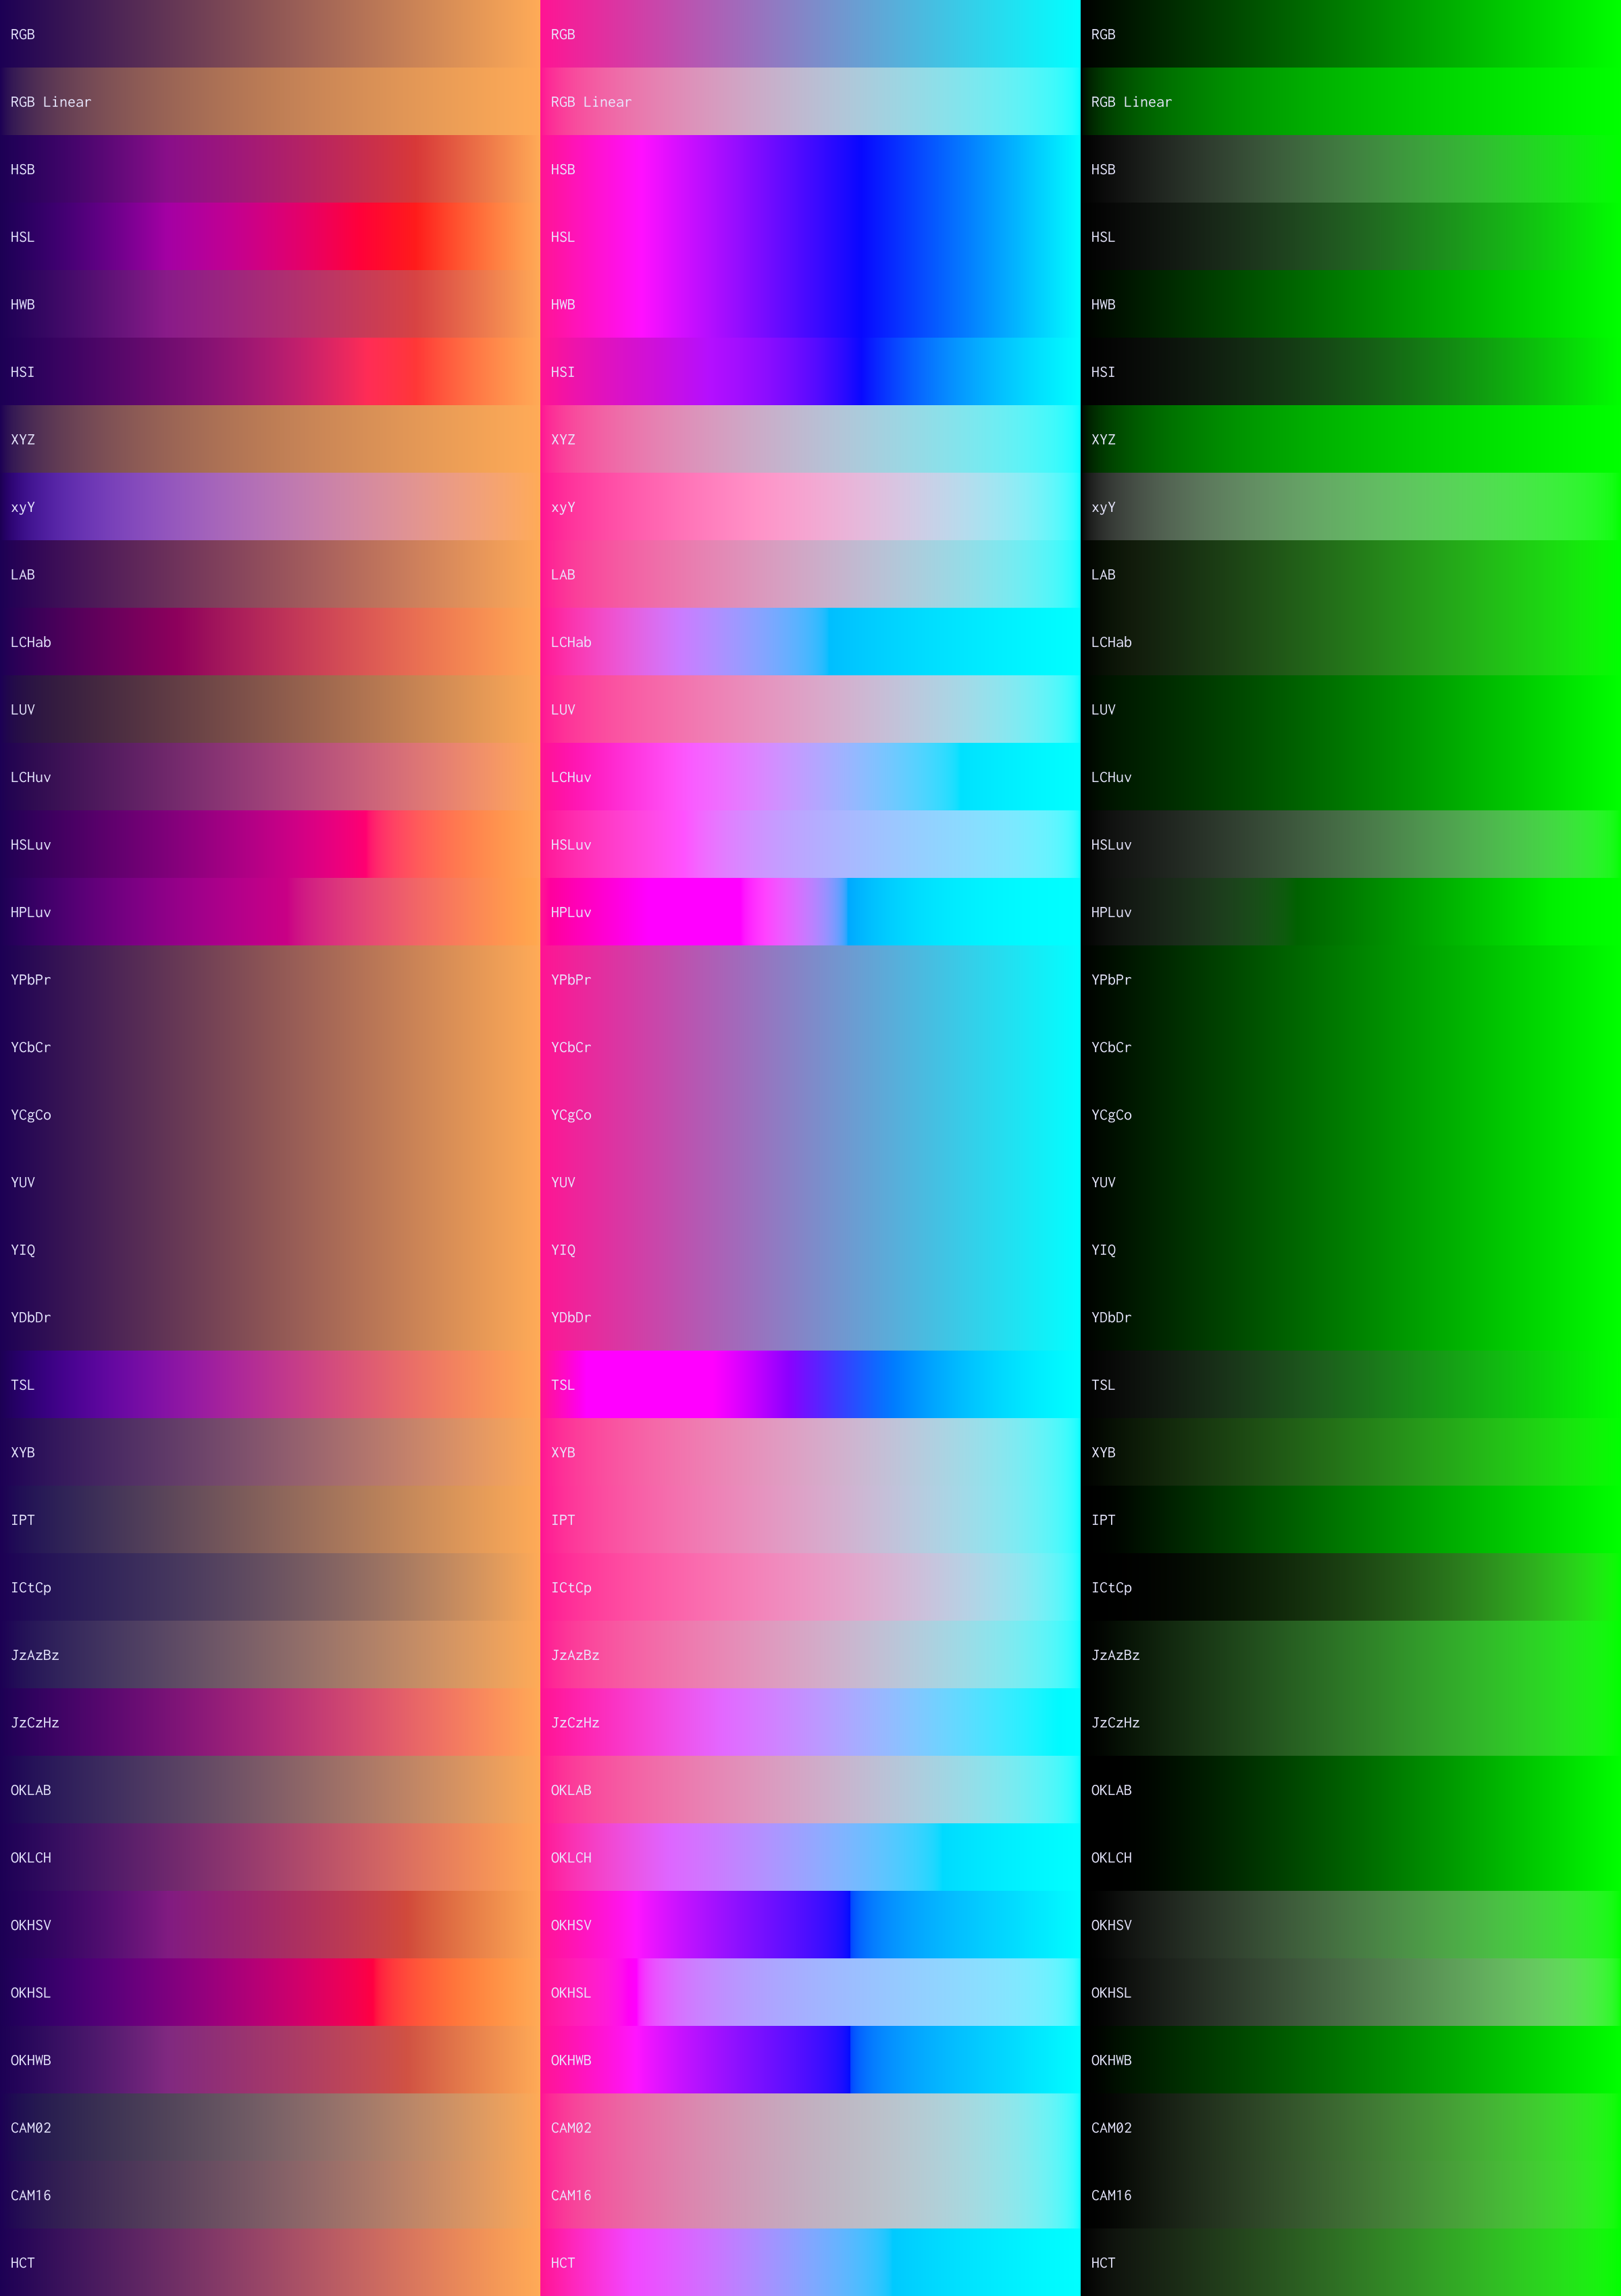 Gradients generated through different color spaces, created with Unicolour